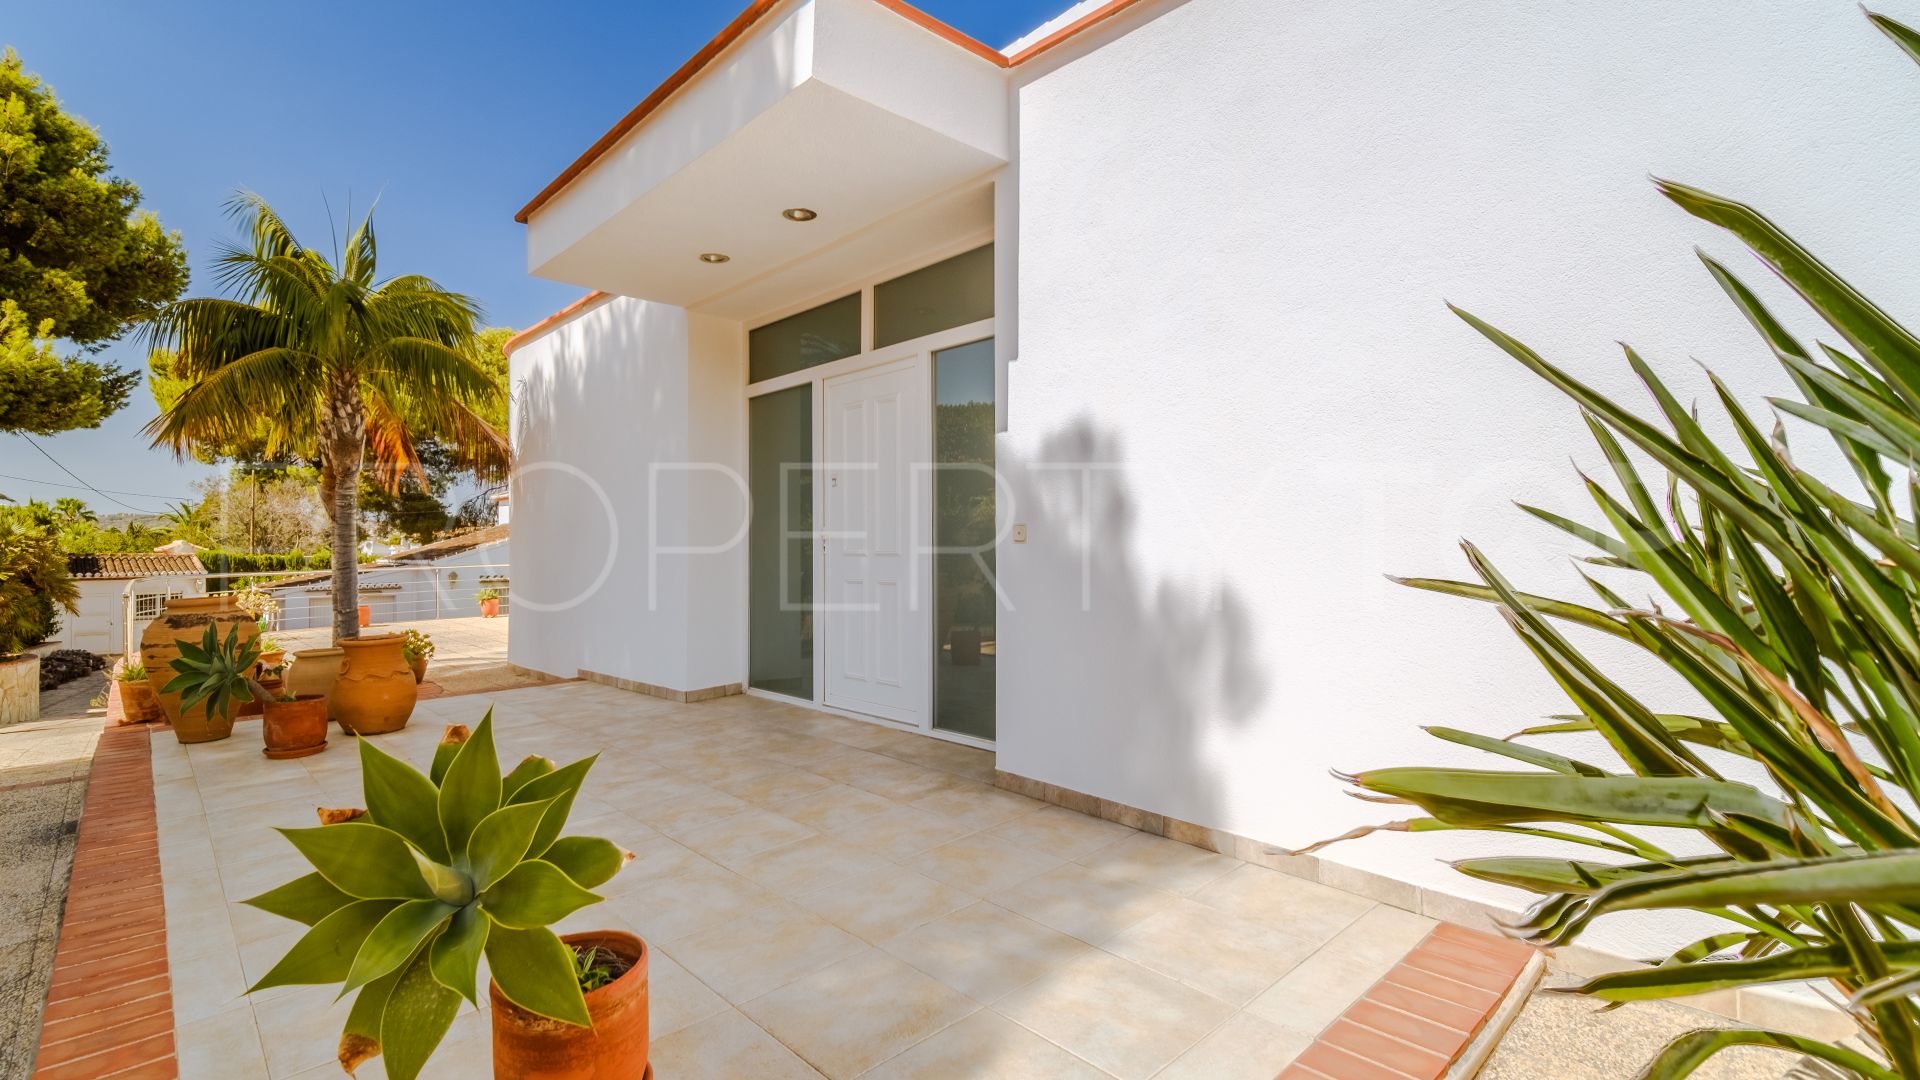 For sale villa with 5 bedrooms in Adsubia